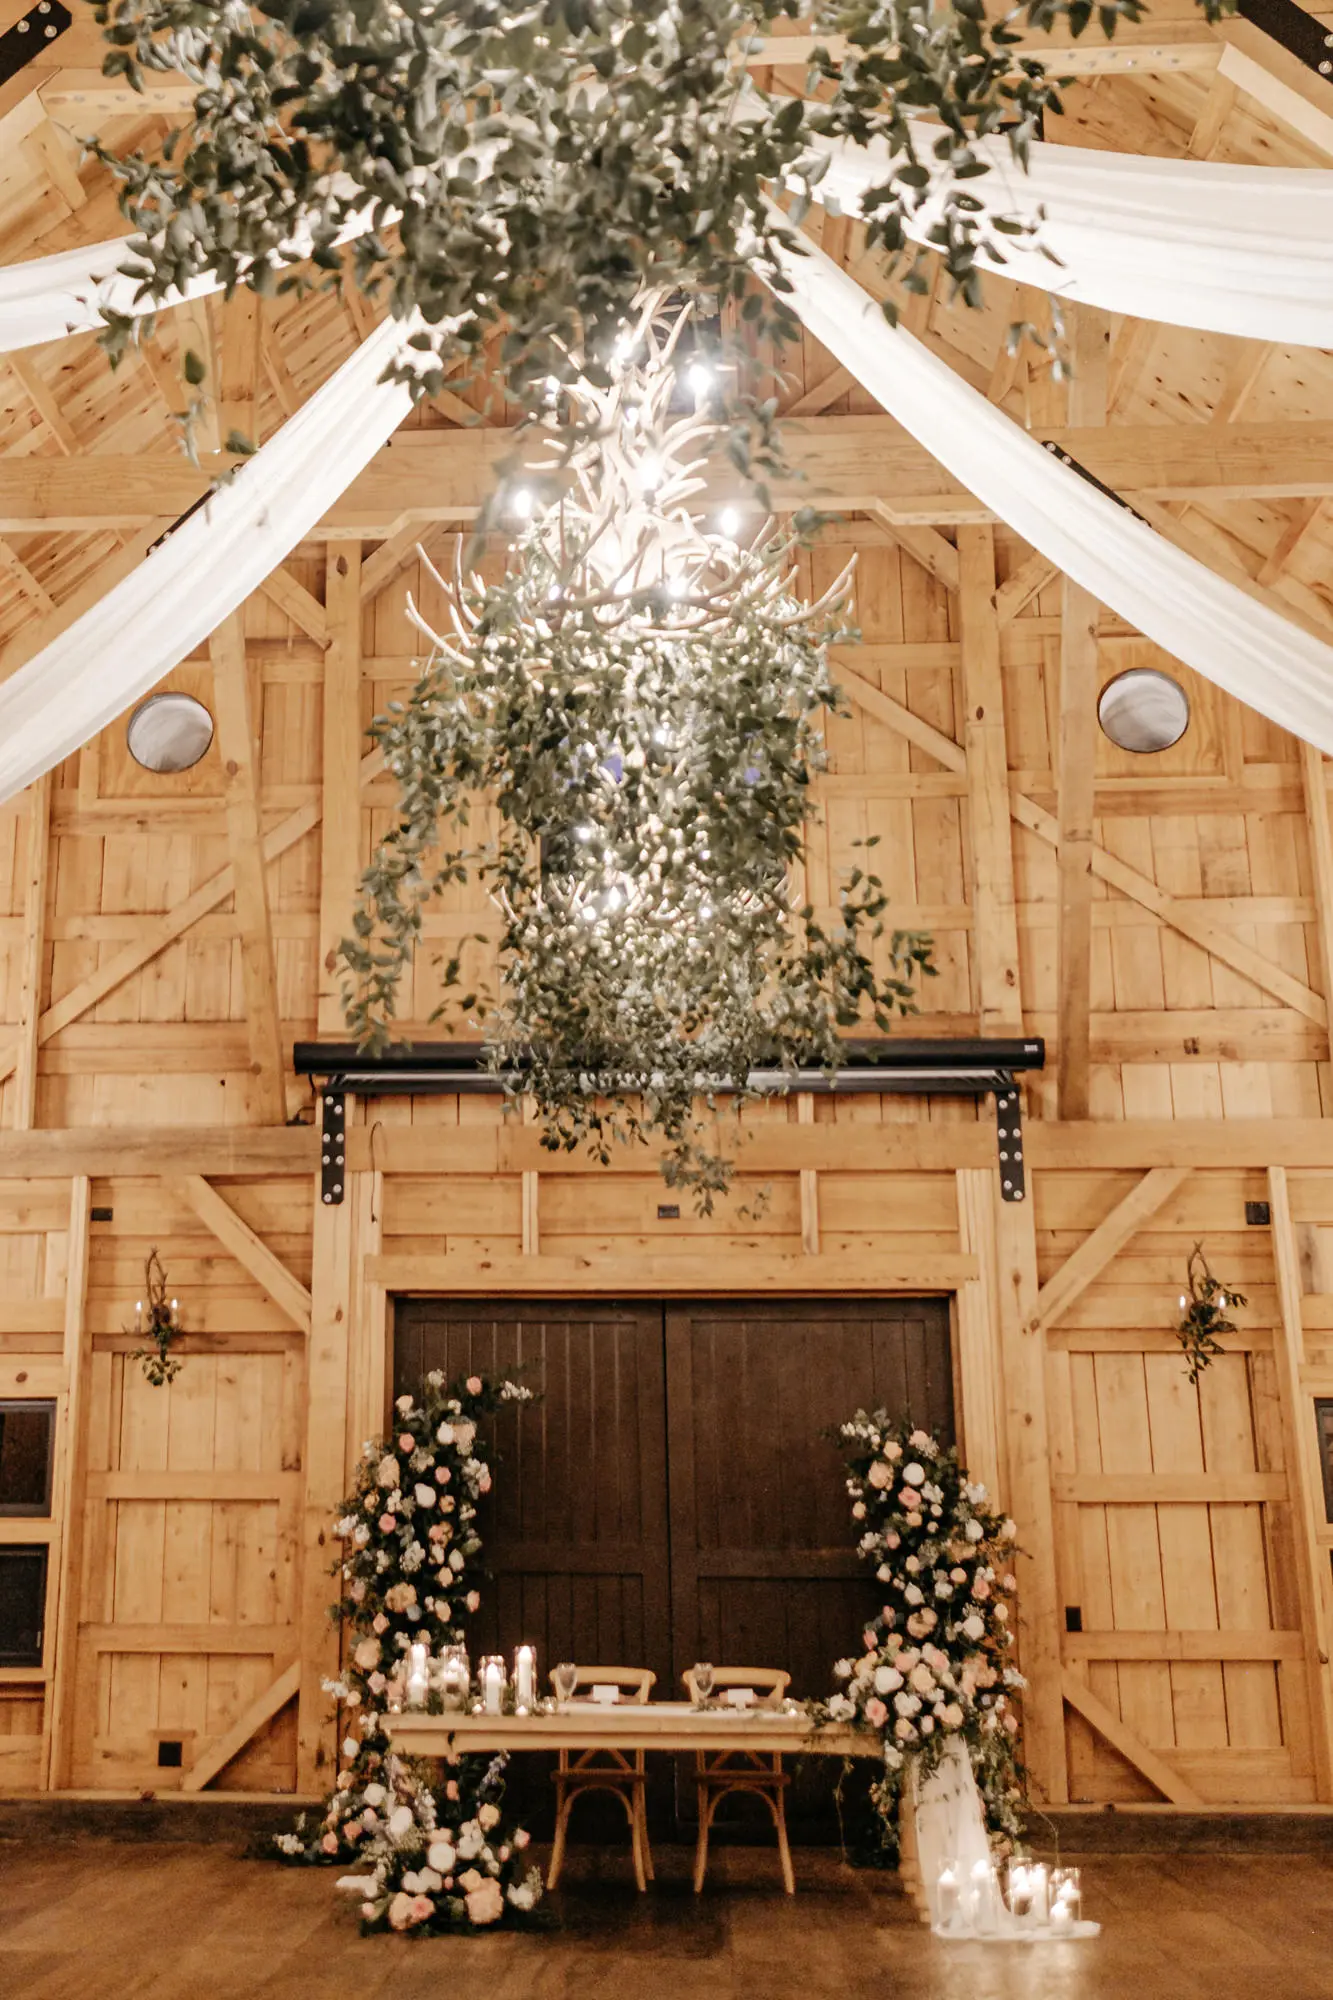 Elegant Garden Inspired White and Pink Rose, and Greenery Barn Wedding Reception Head Table Decor Ideas | Greenery Chandelier Inspiration | Tampa Bay Florist Monarch Events | Venue Mision Lago Estate | Planner Coastal Coordinating